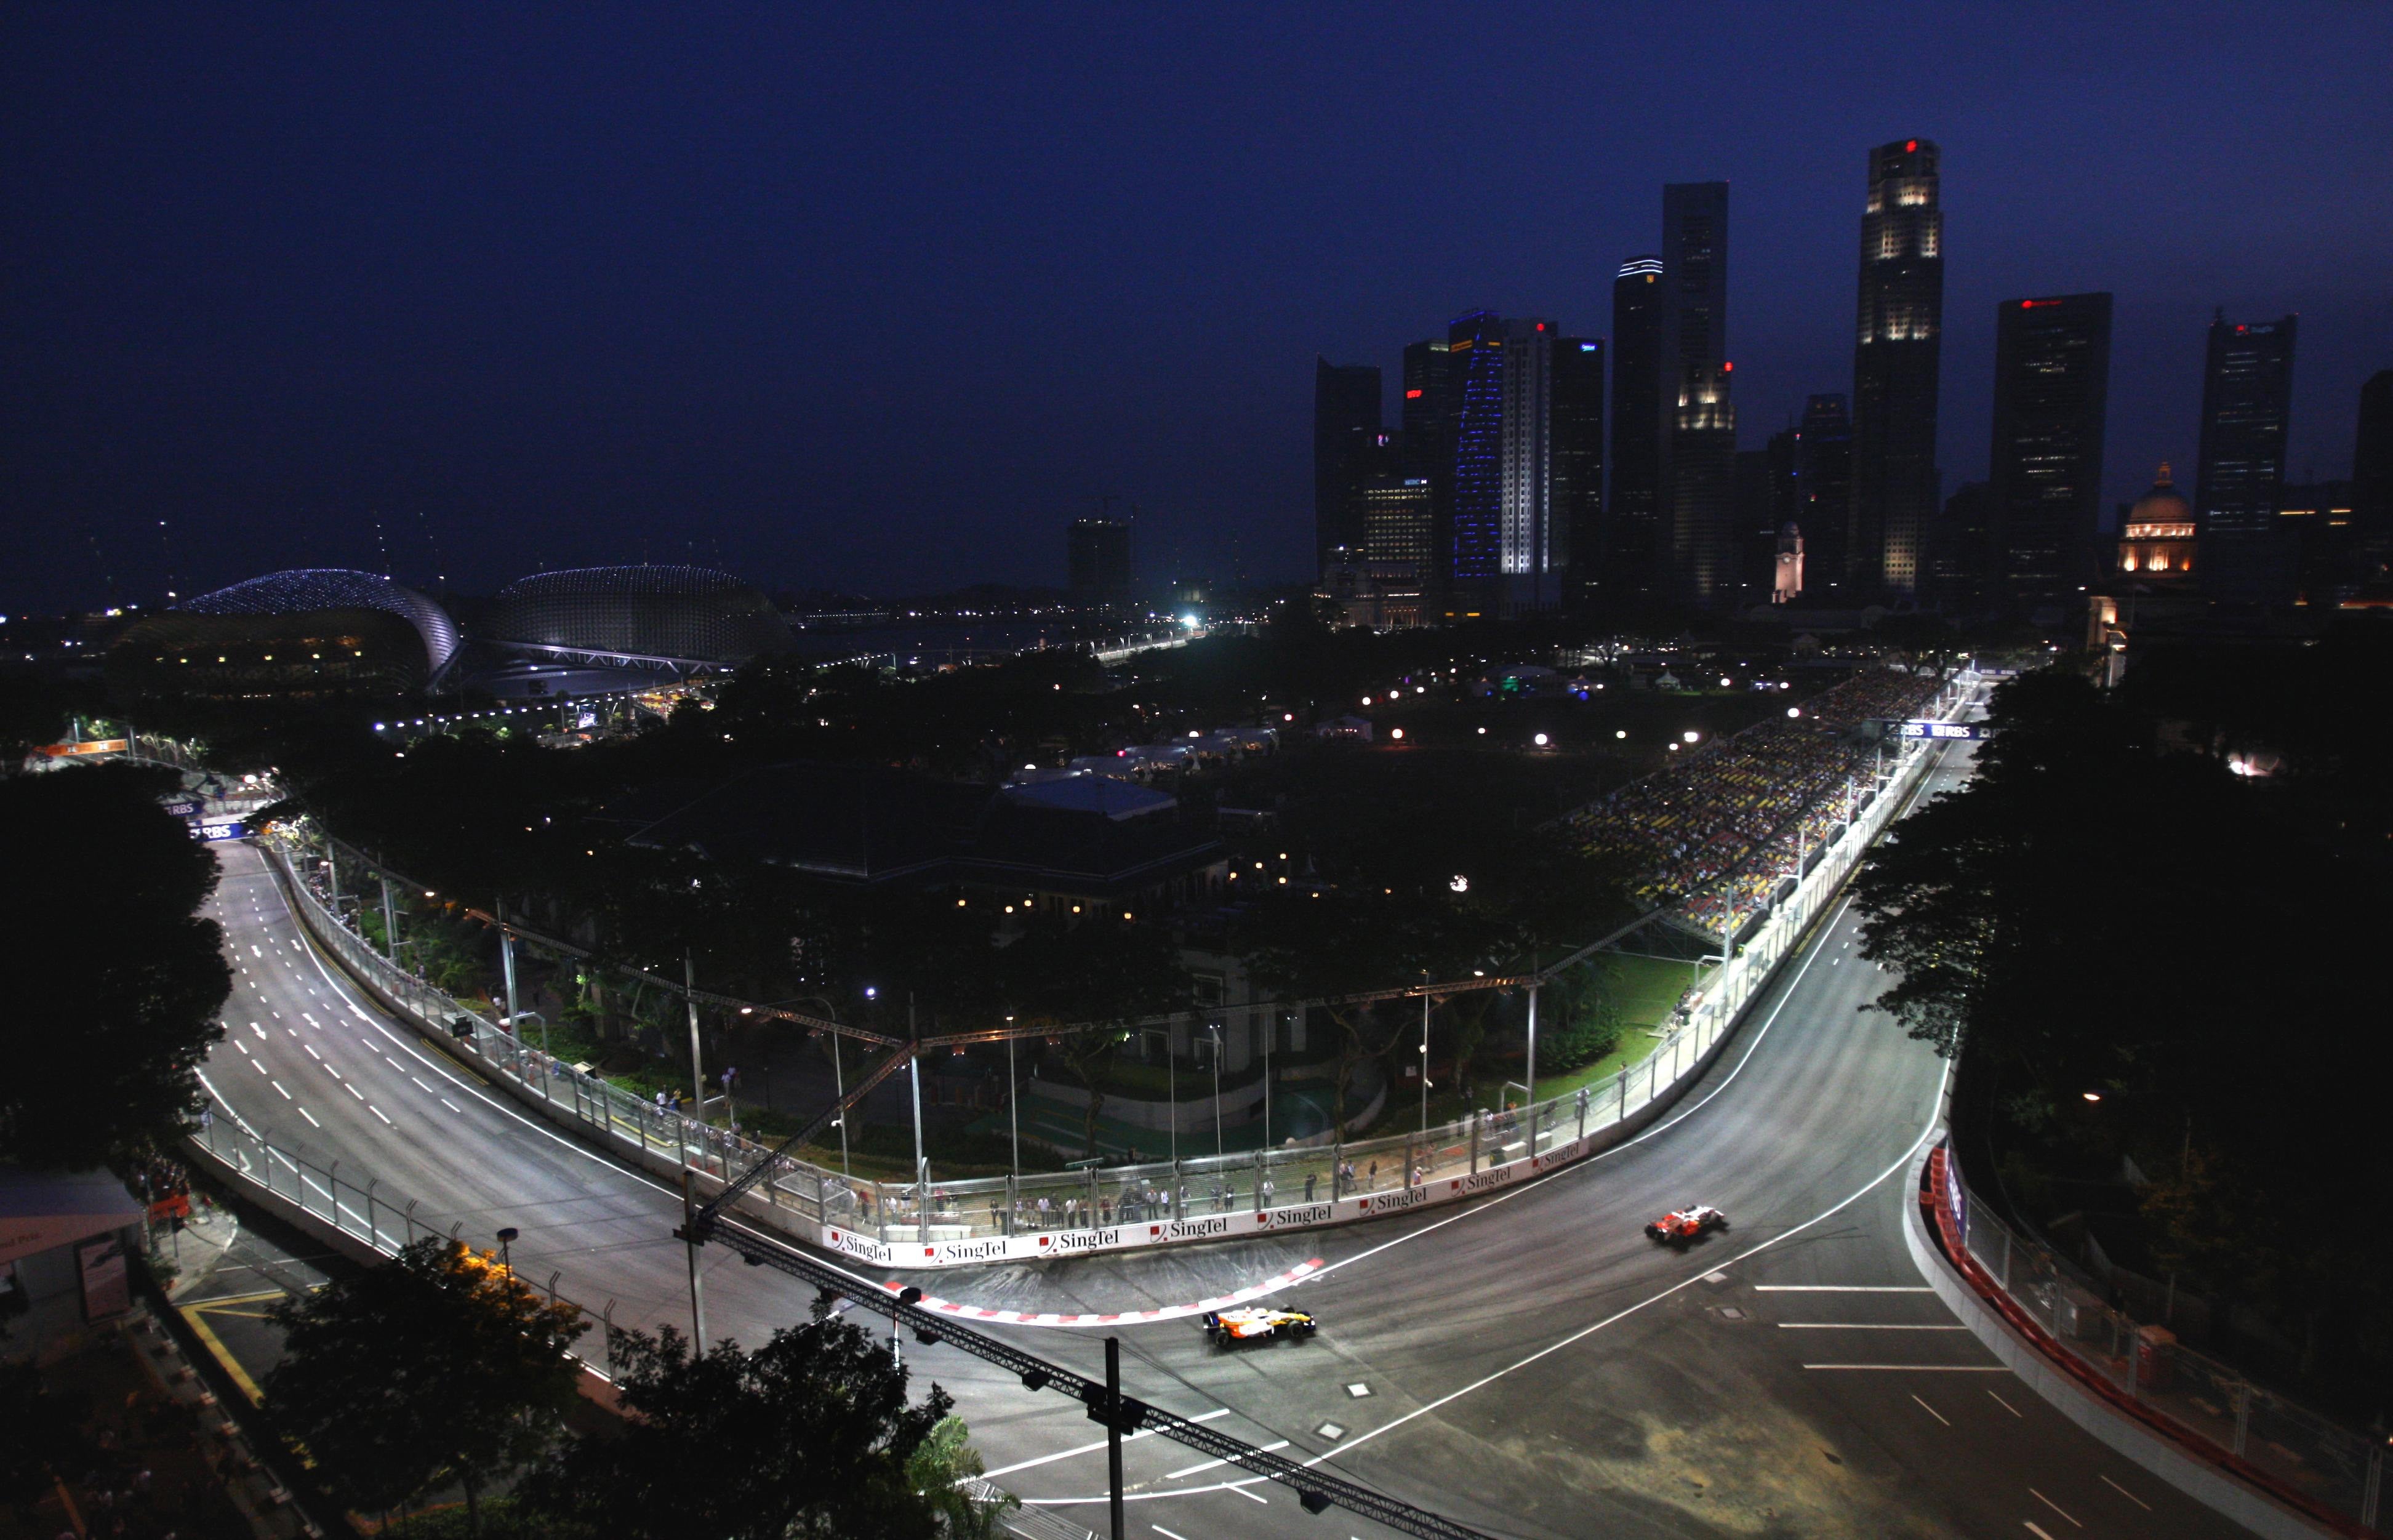 The Singapore Grand Prix has been cancelled